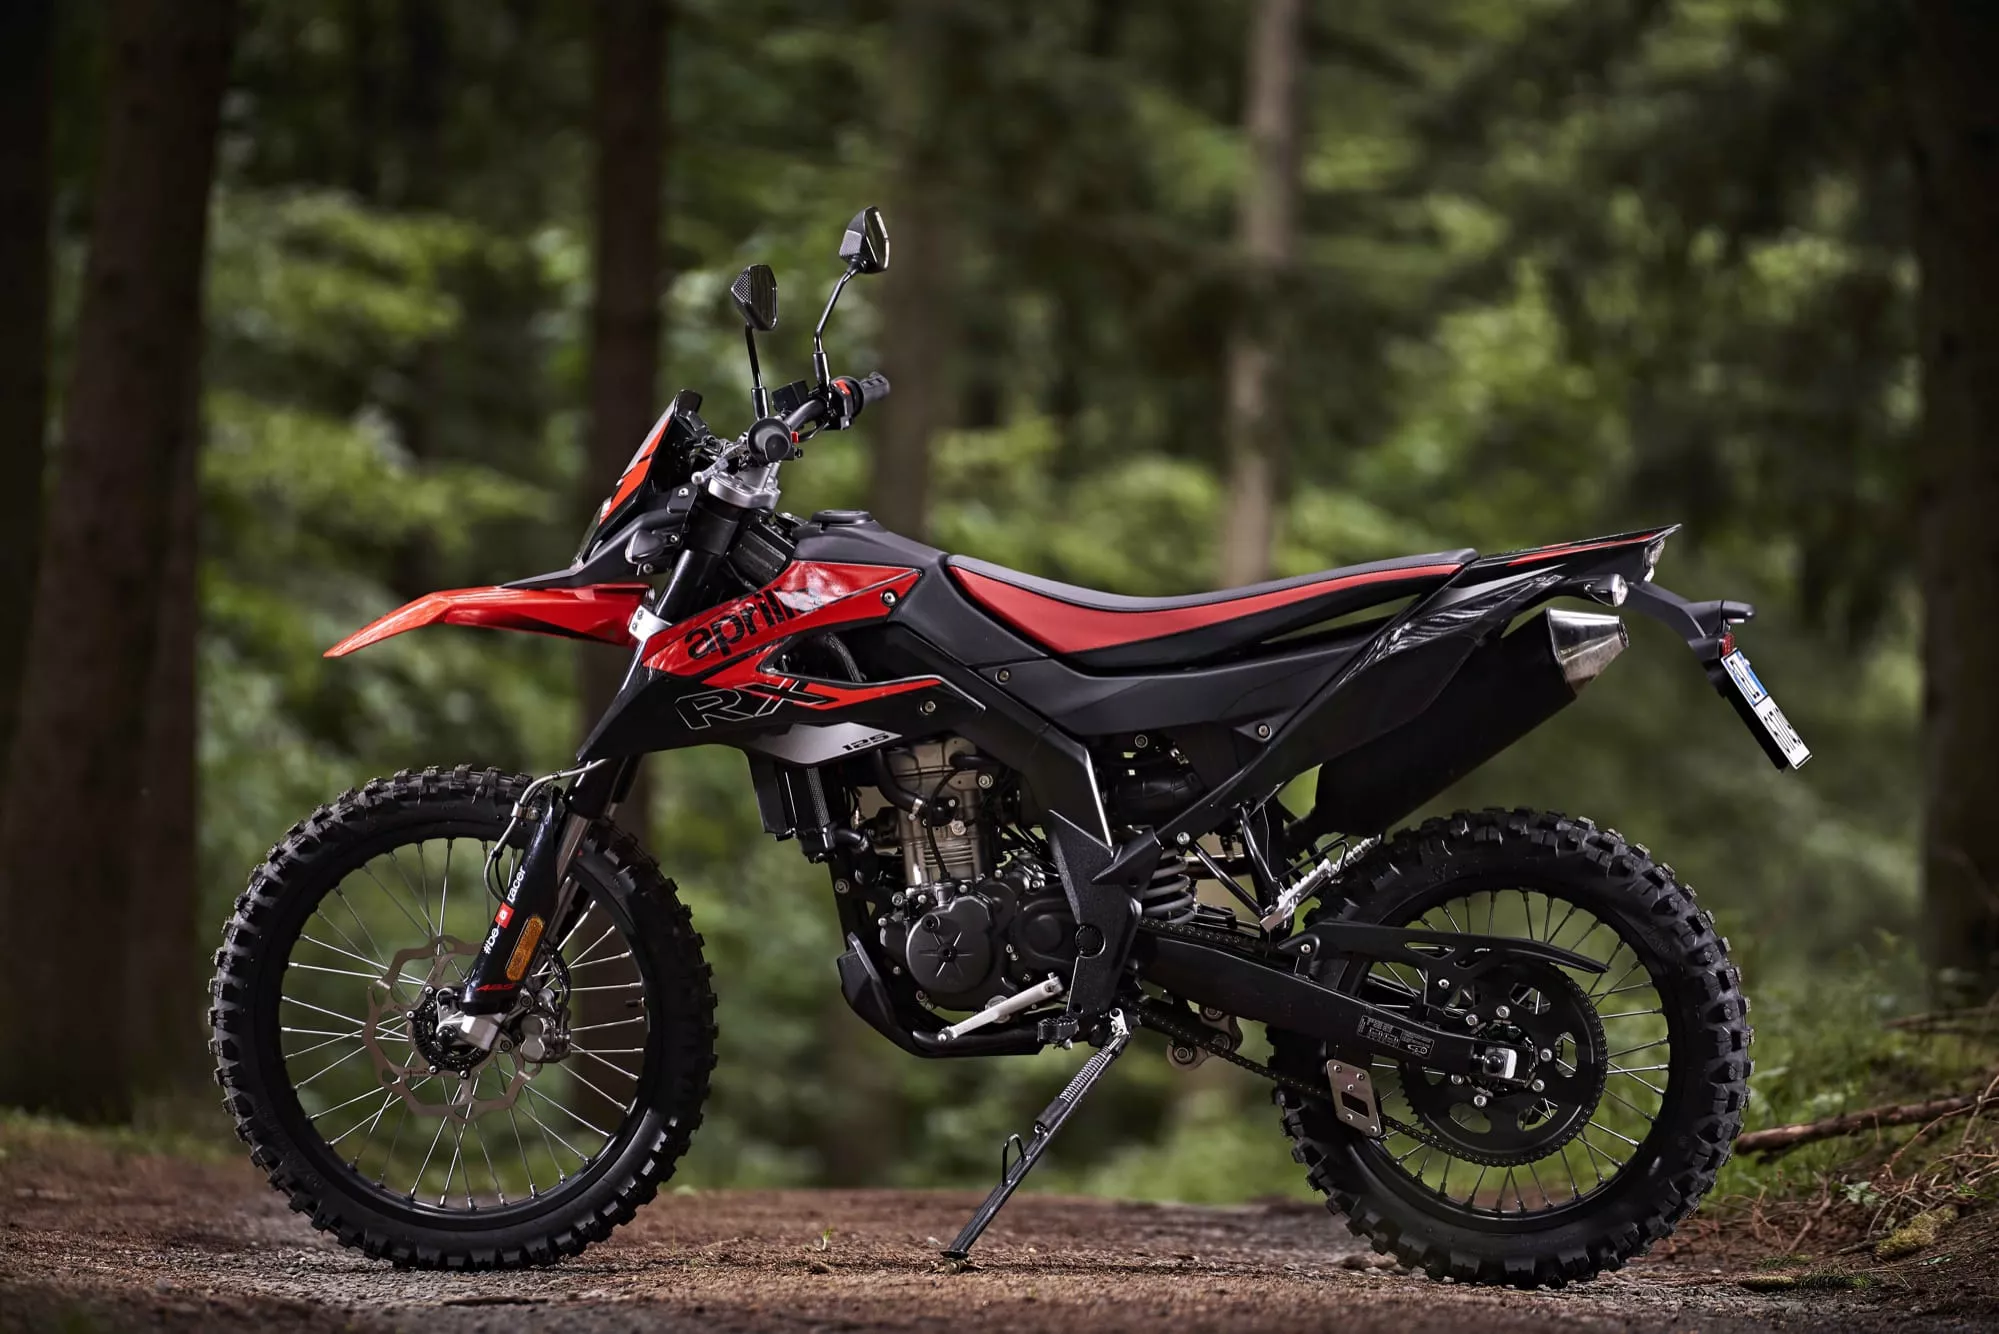 Enduro Puro in Italy, Europe | Motorcycles - Rated 0.8